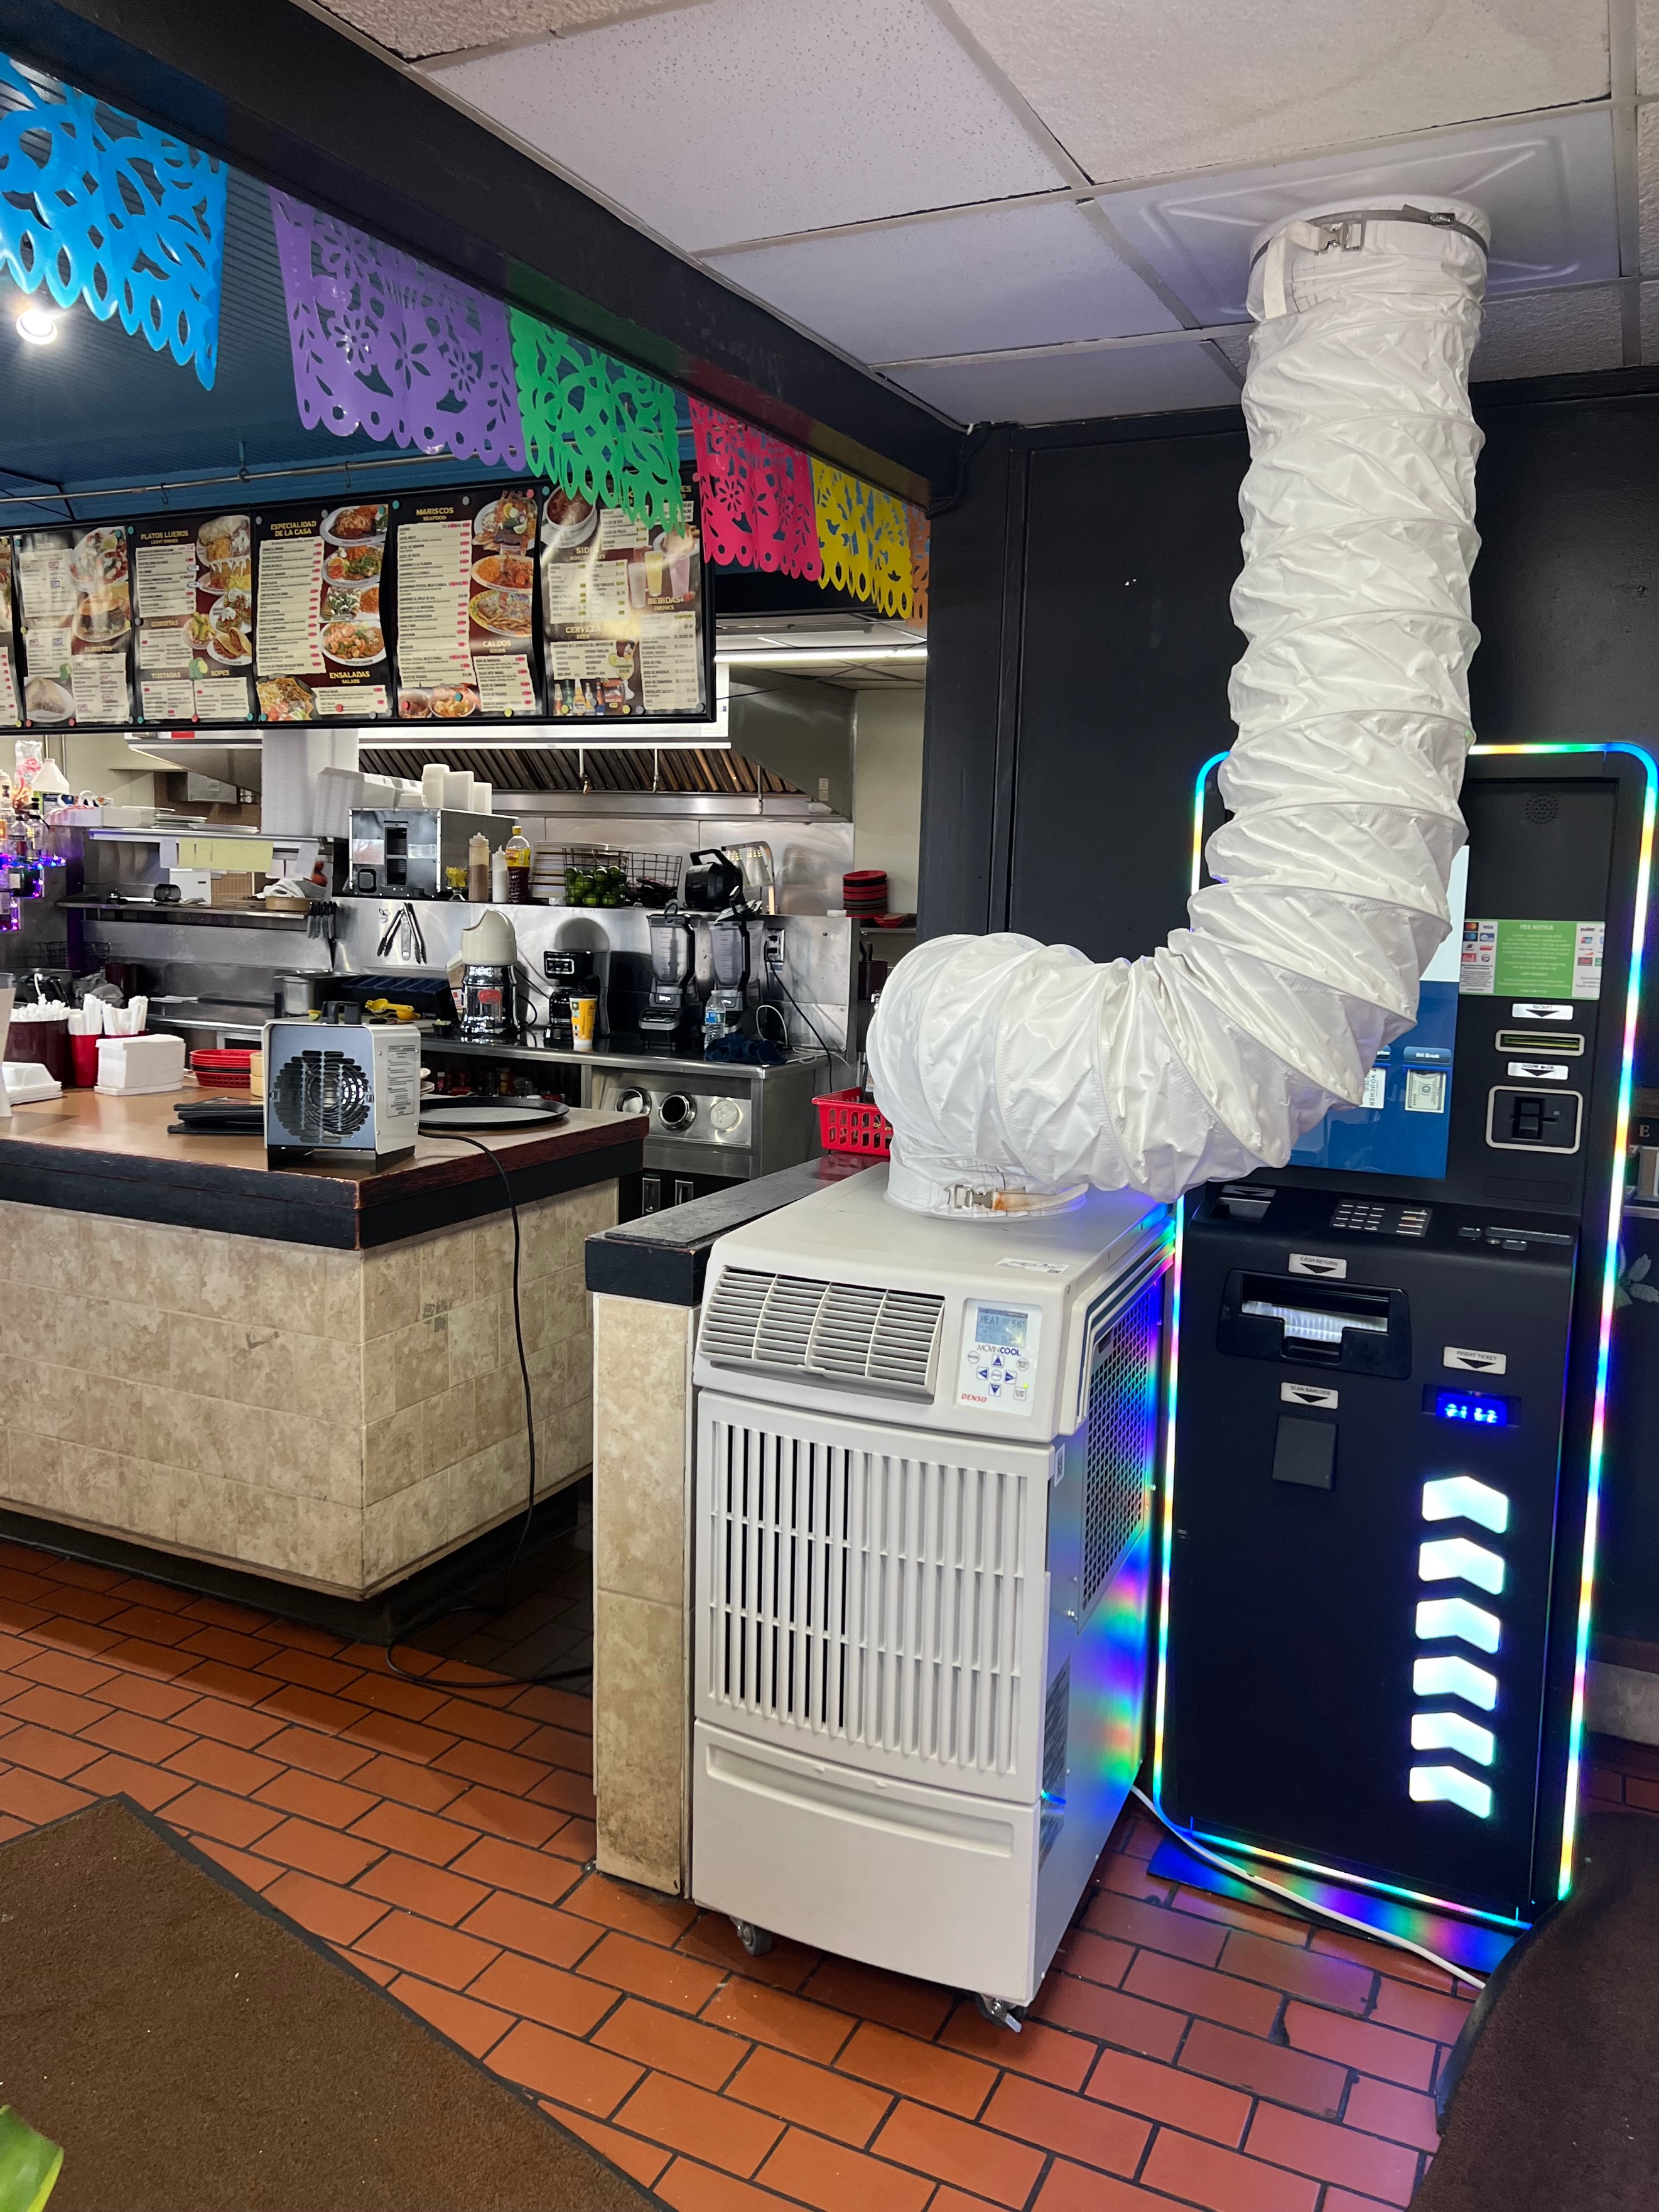 A Climate Pro Heat Pump rental on wheels placed in a fast-food restaurant floor with a 1.5 kW electric heater positioned on the service counter. 